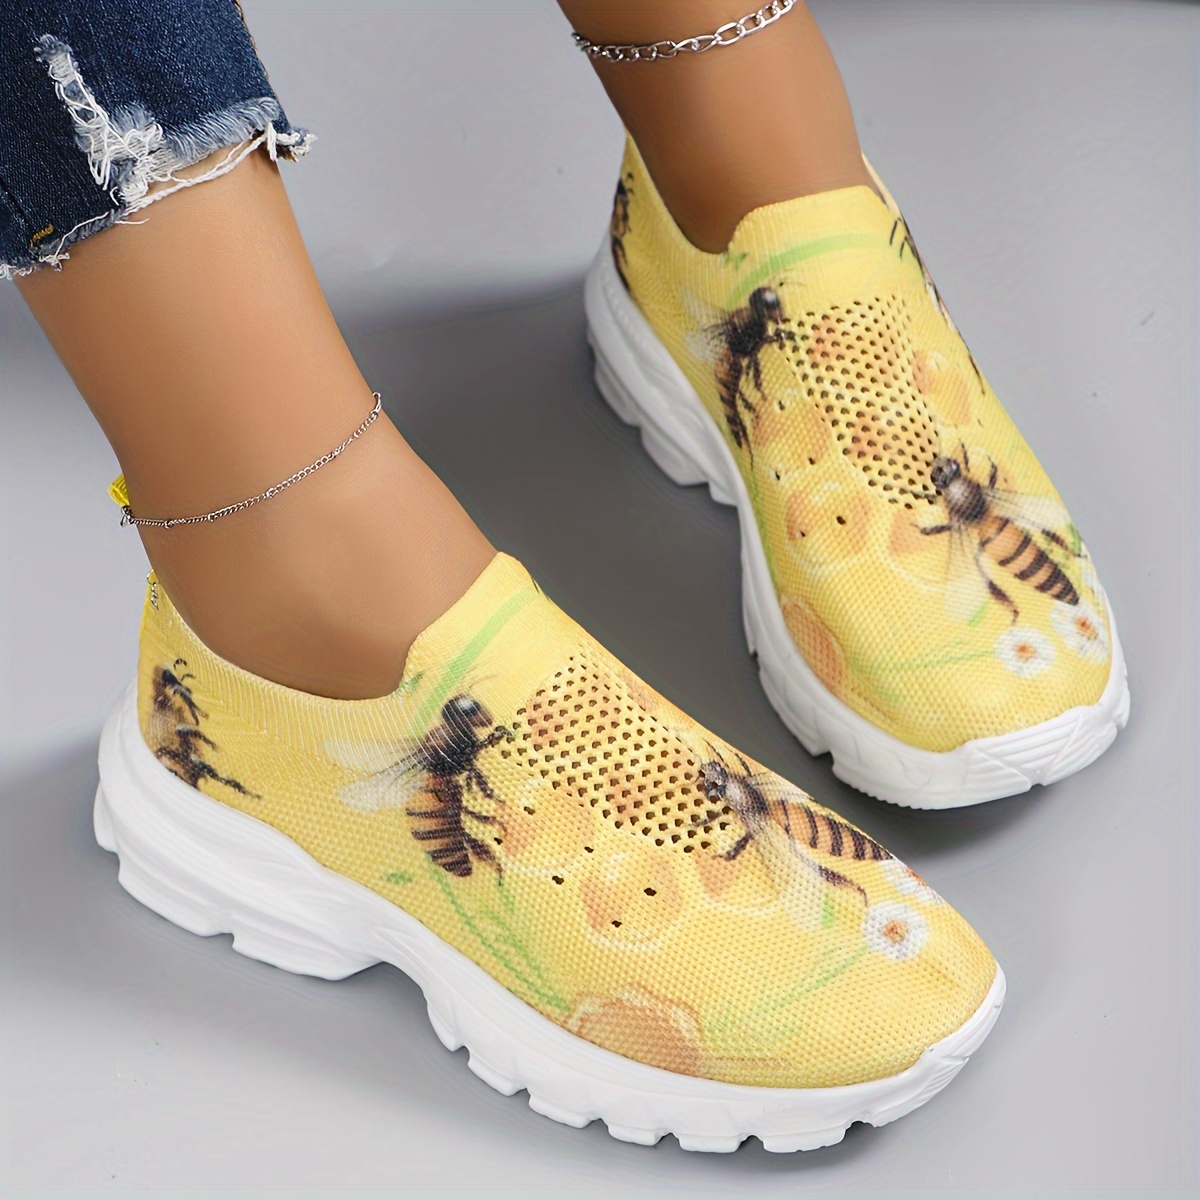 

Women's Lightweight Walking Shoes, Trendy Cartoon Bee Printed, Comfortable Slip-on Camp Shoes, Breathable Casual Outdoor Sneakers